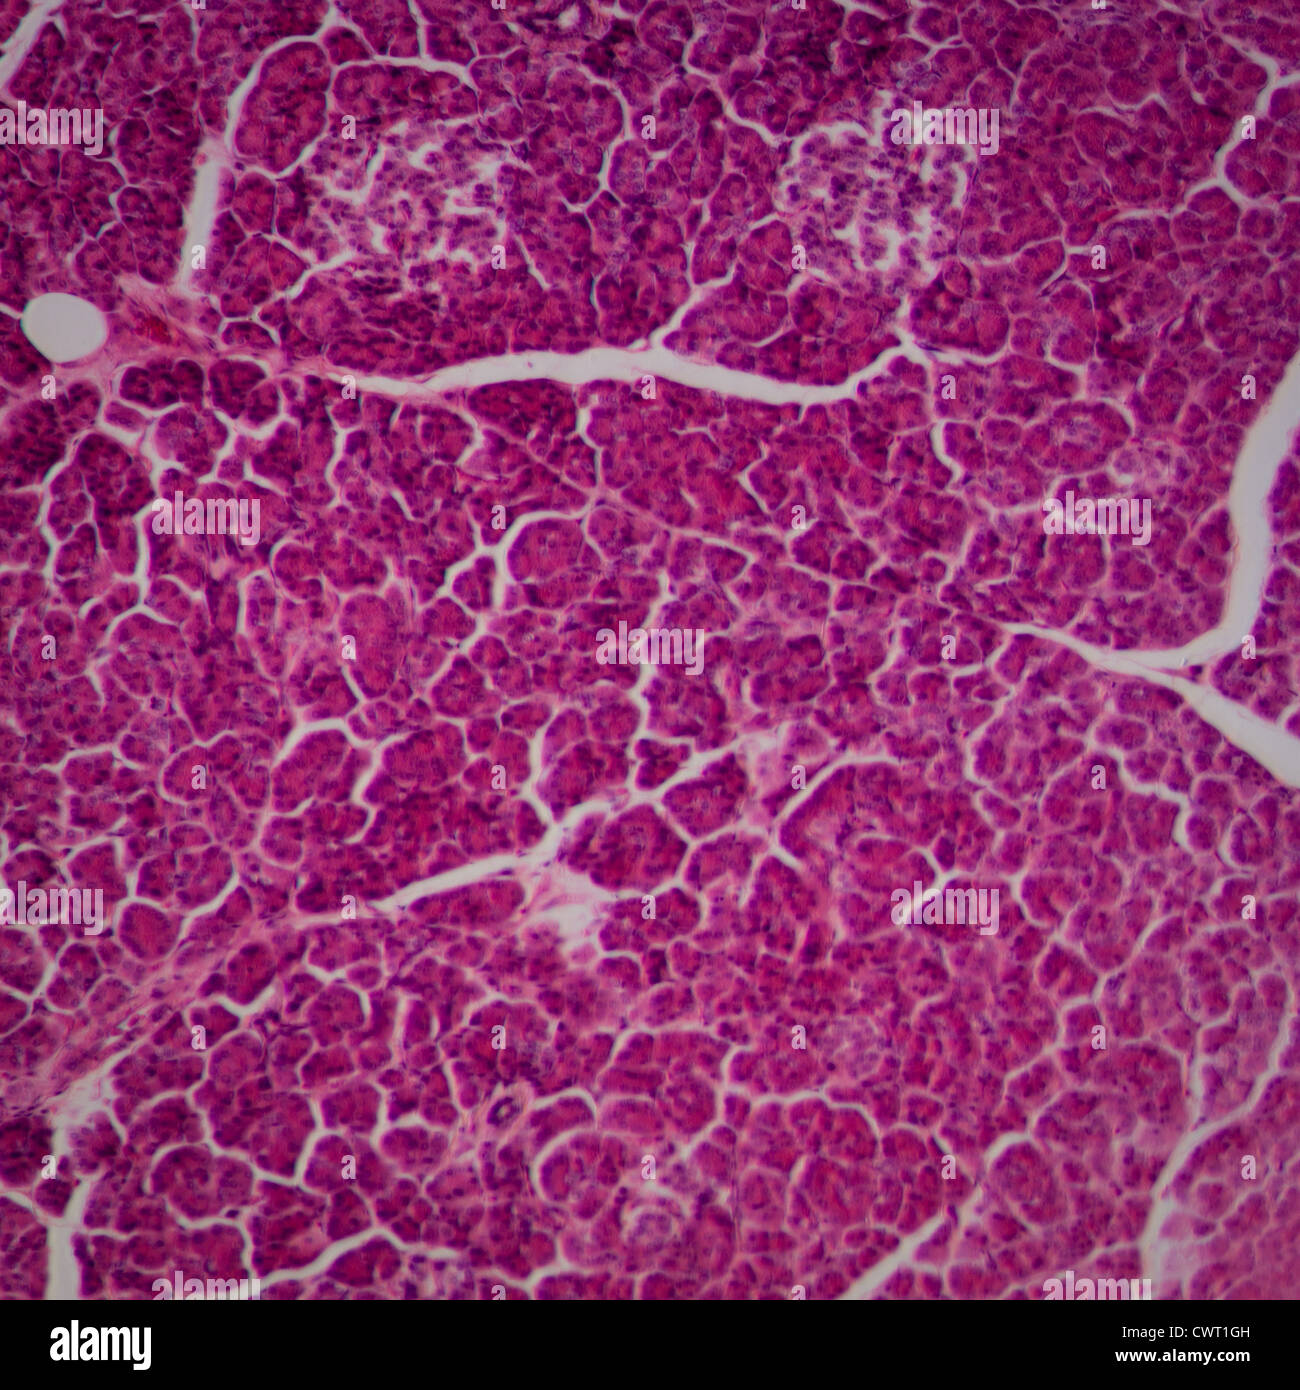 science microscopic section of liver tissue Stock Photo